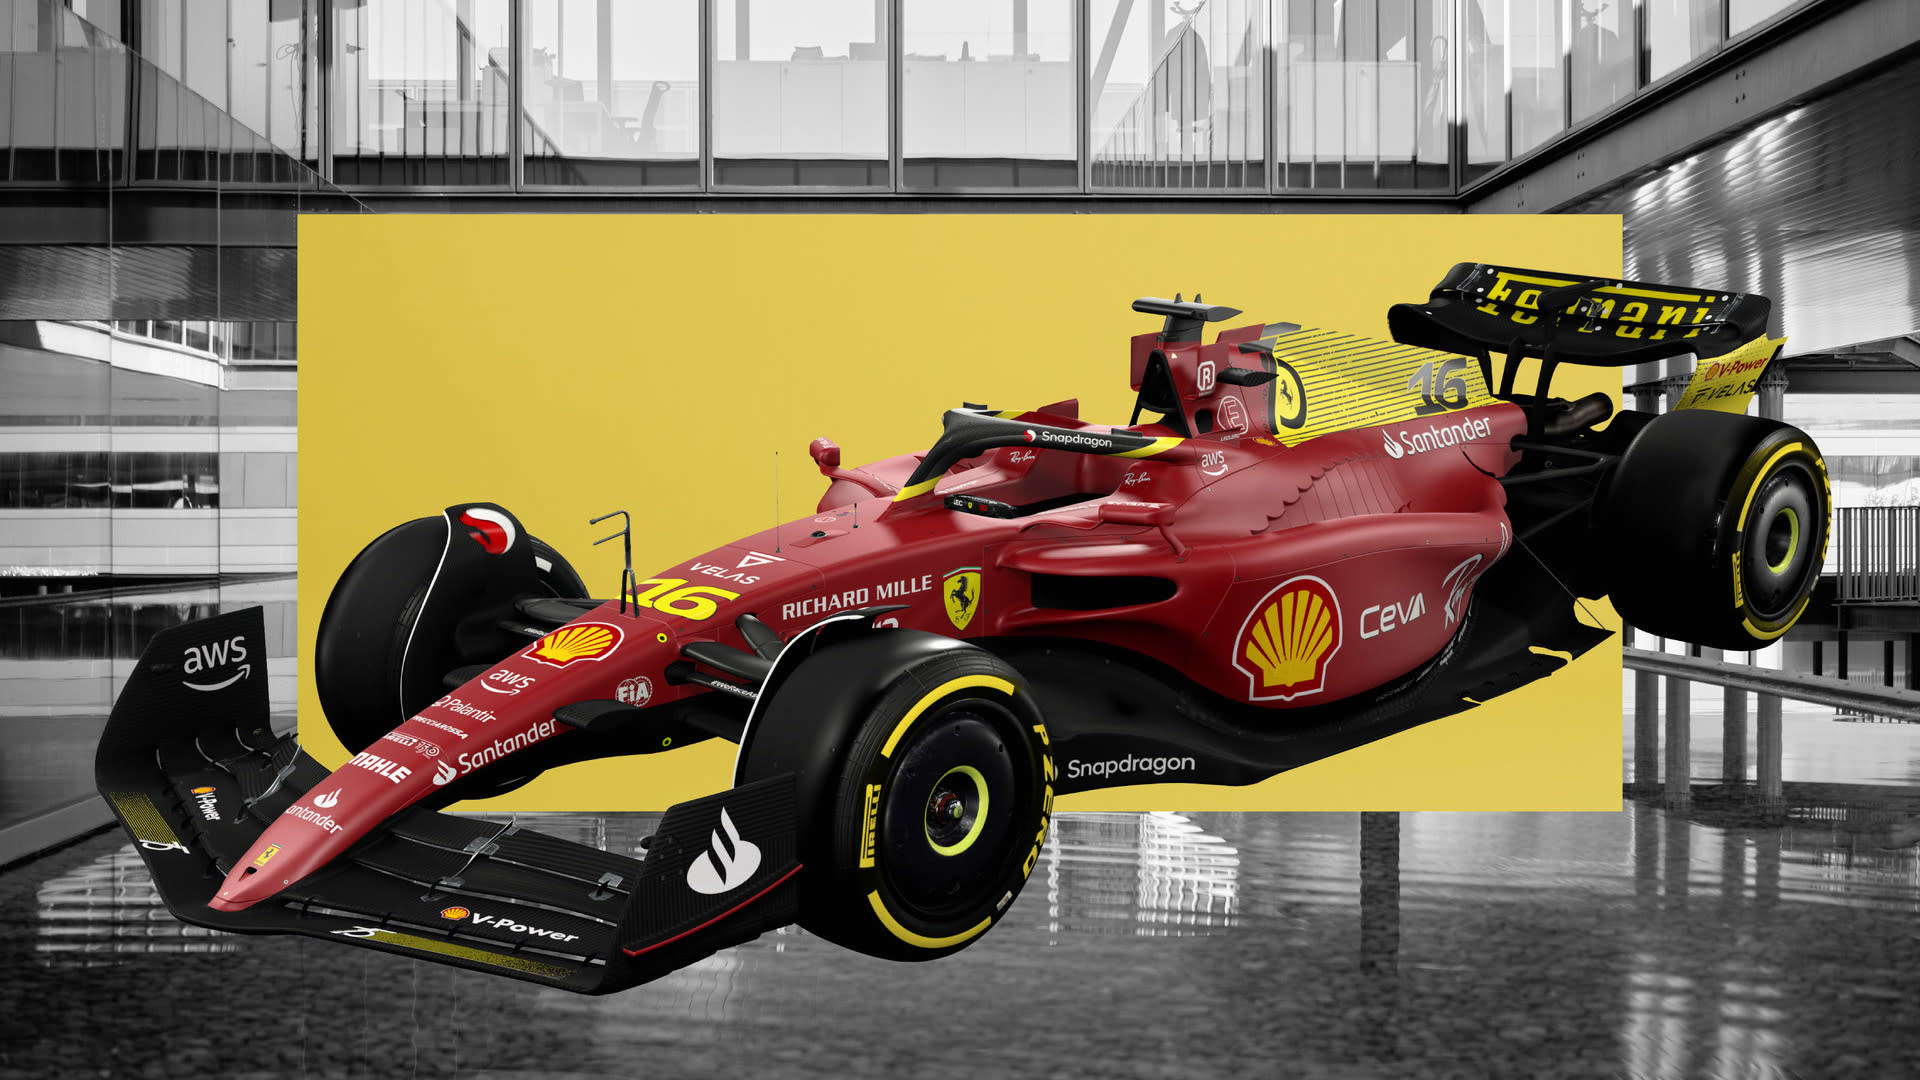 Ferrari unveil special livery with a splash of yellow for home Grand Prix at Monza Formula 1®